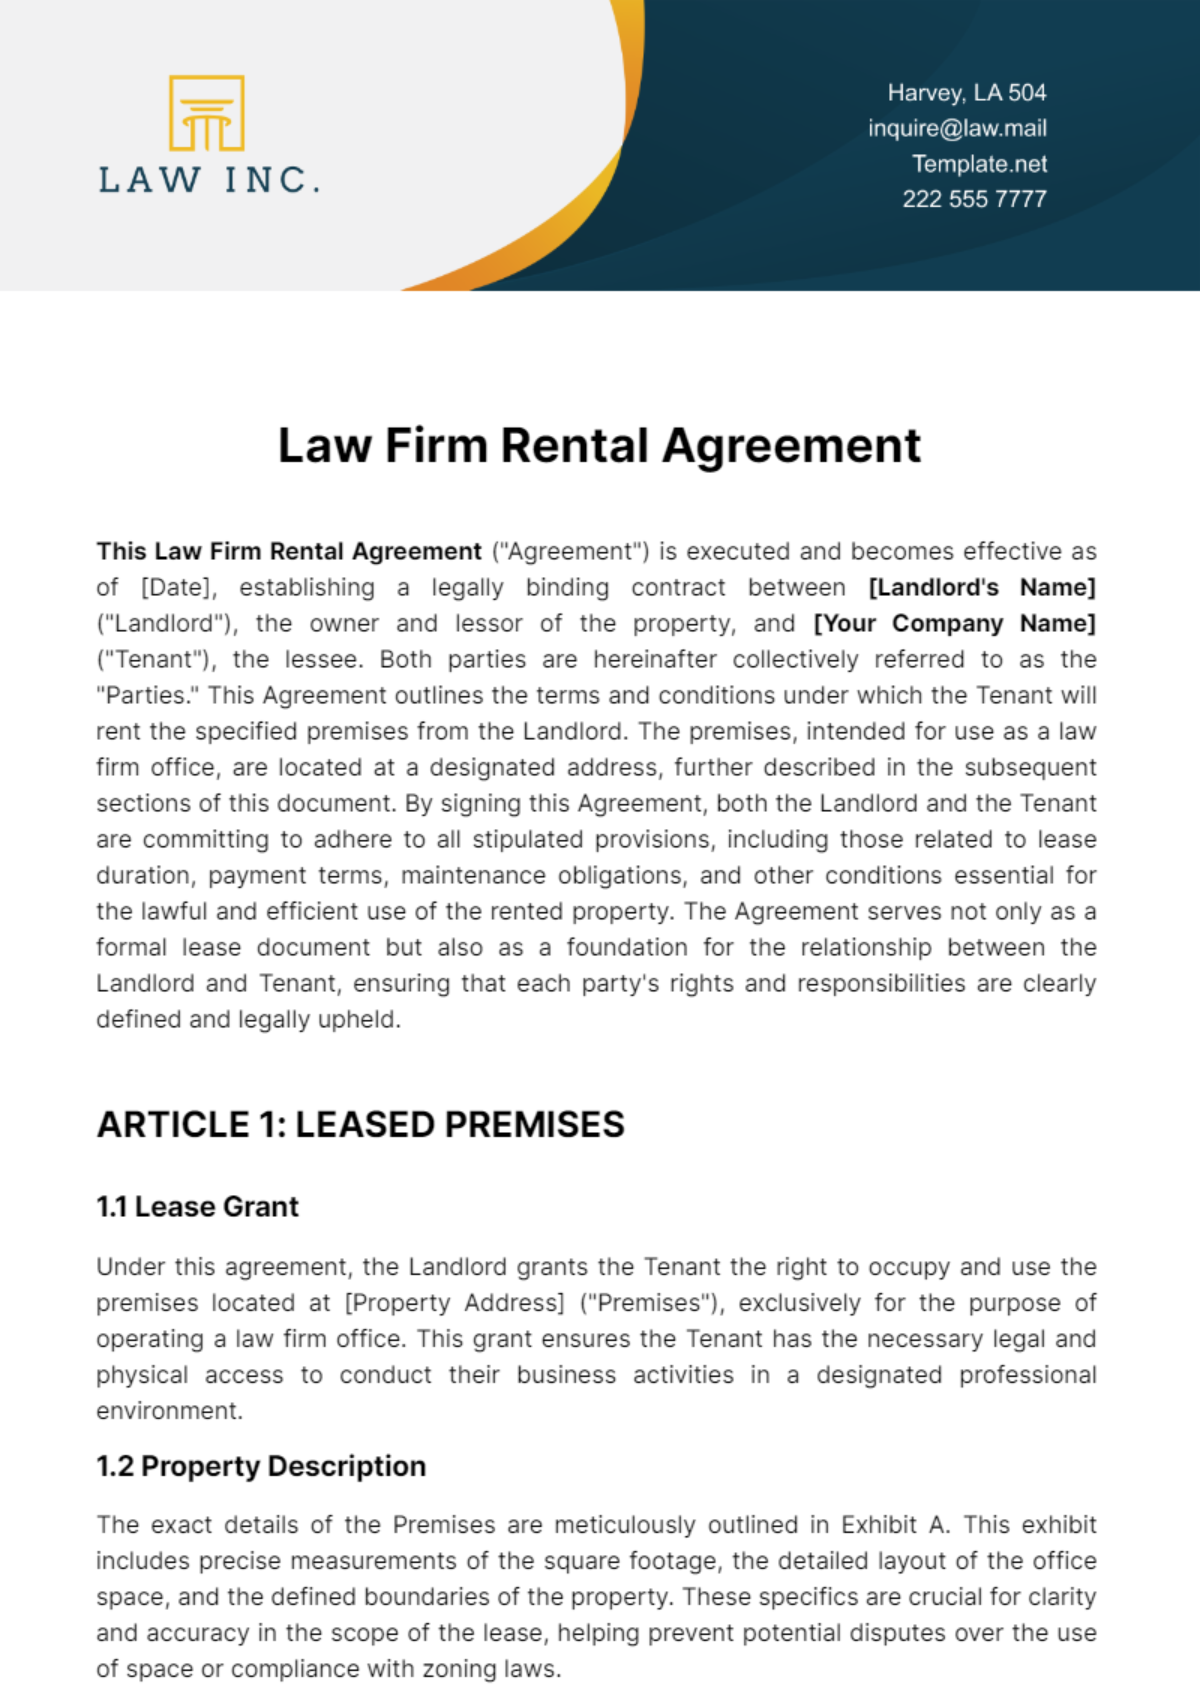 Law Firm Rental Agreement Template